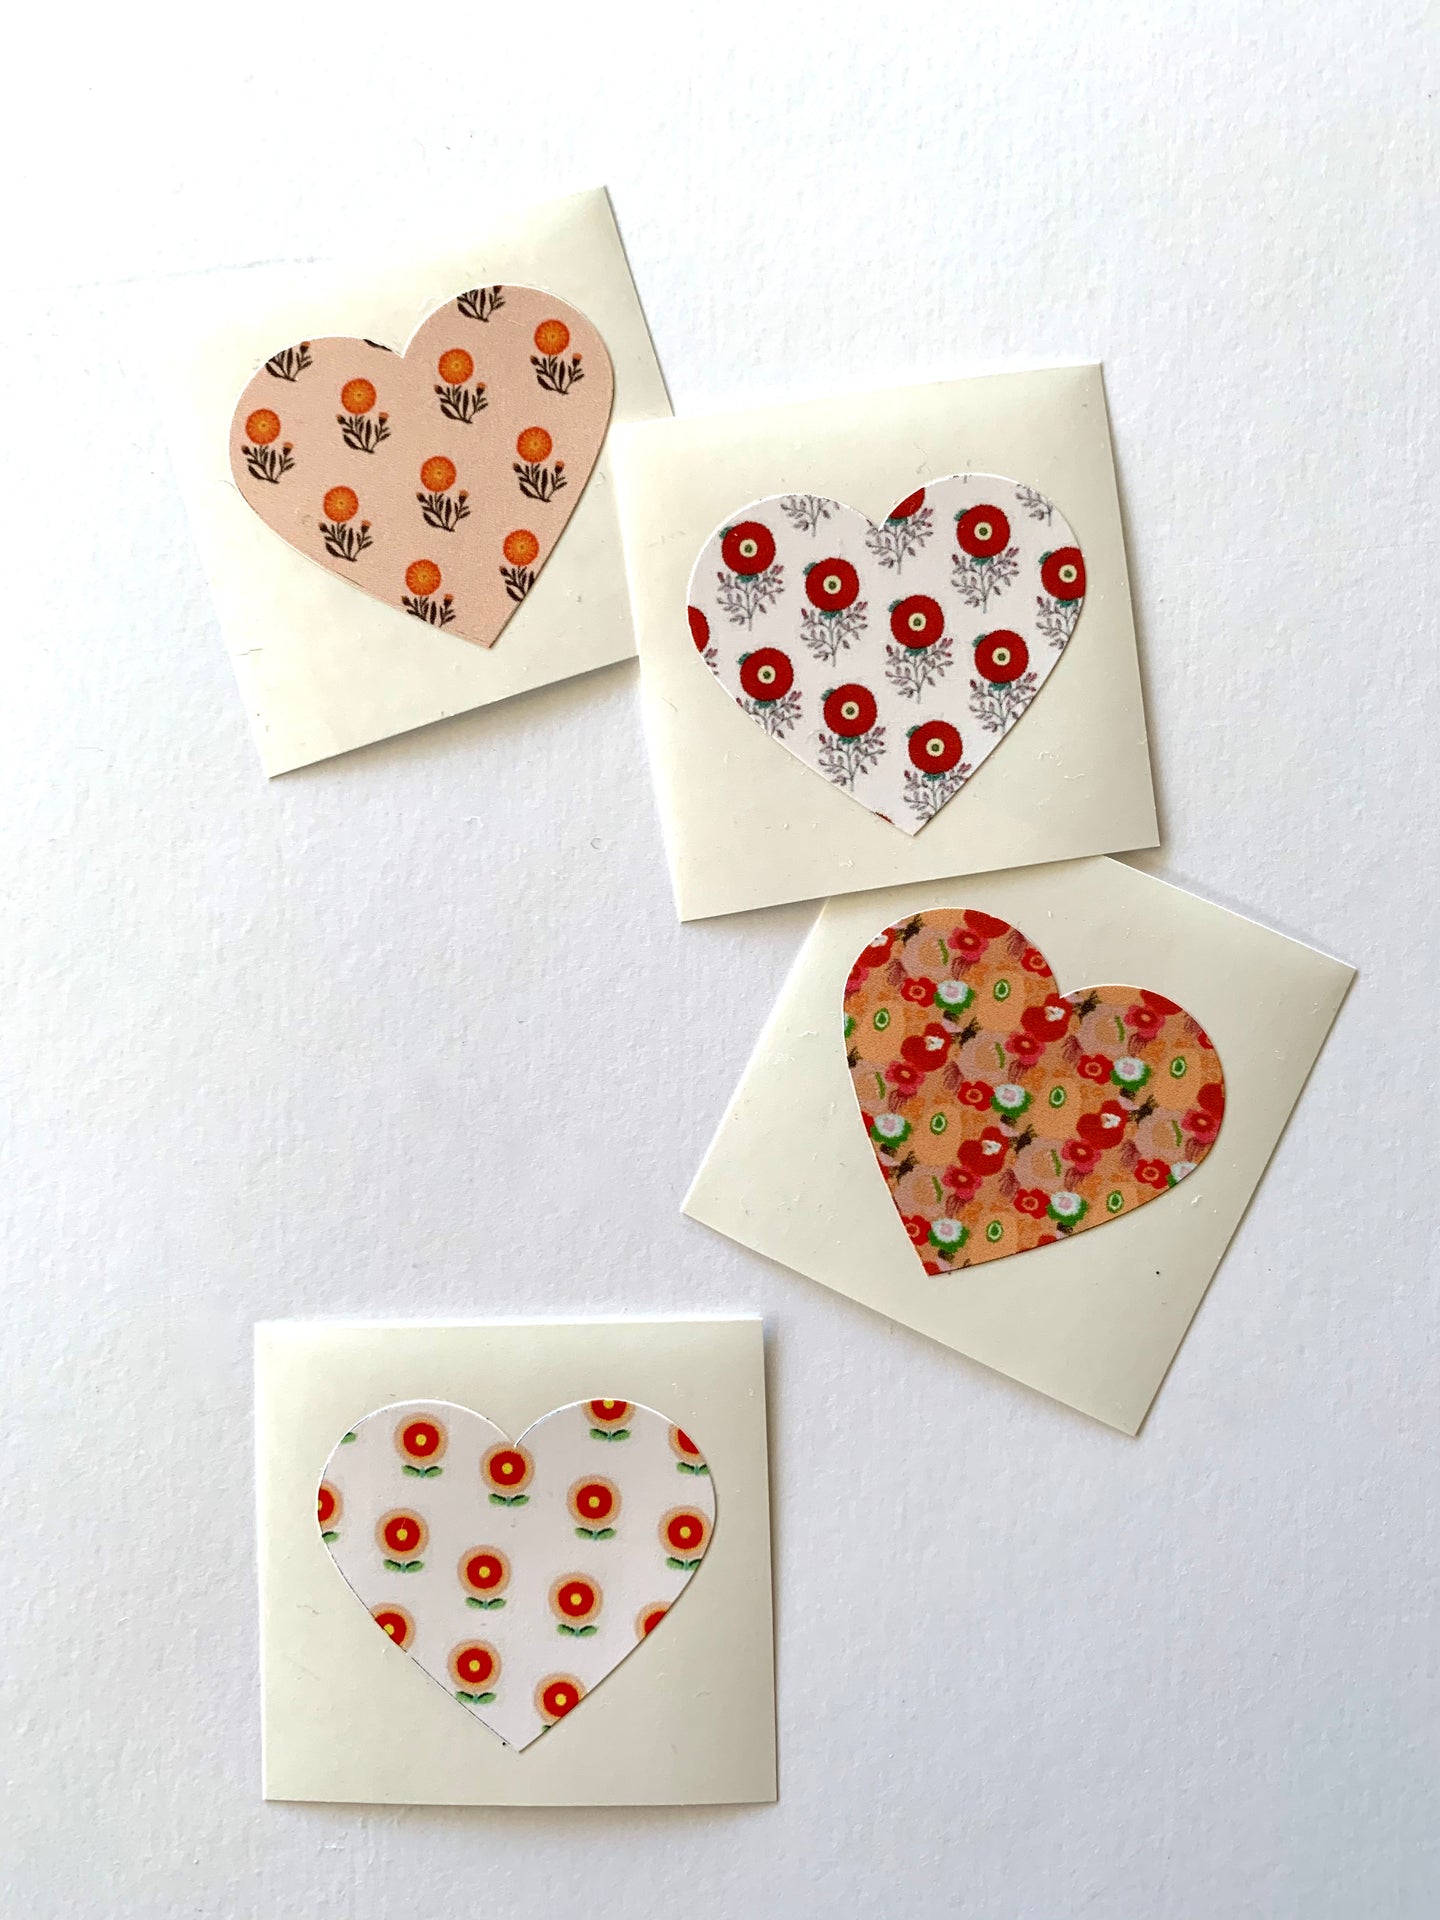 RED FLORAL Patterns (4) heart-shaped stickers